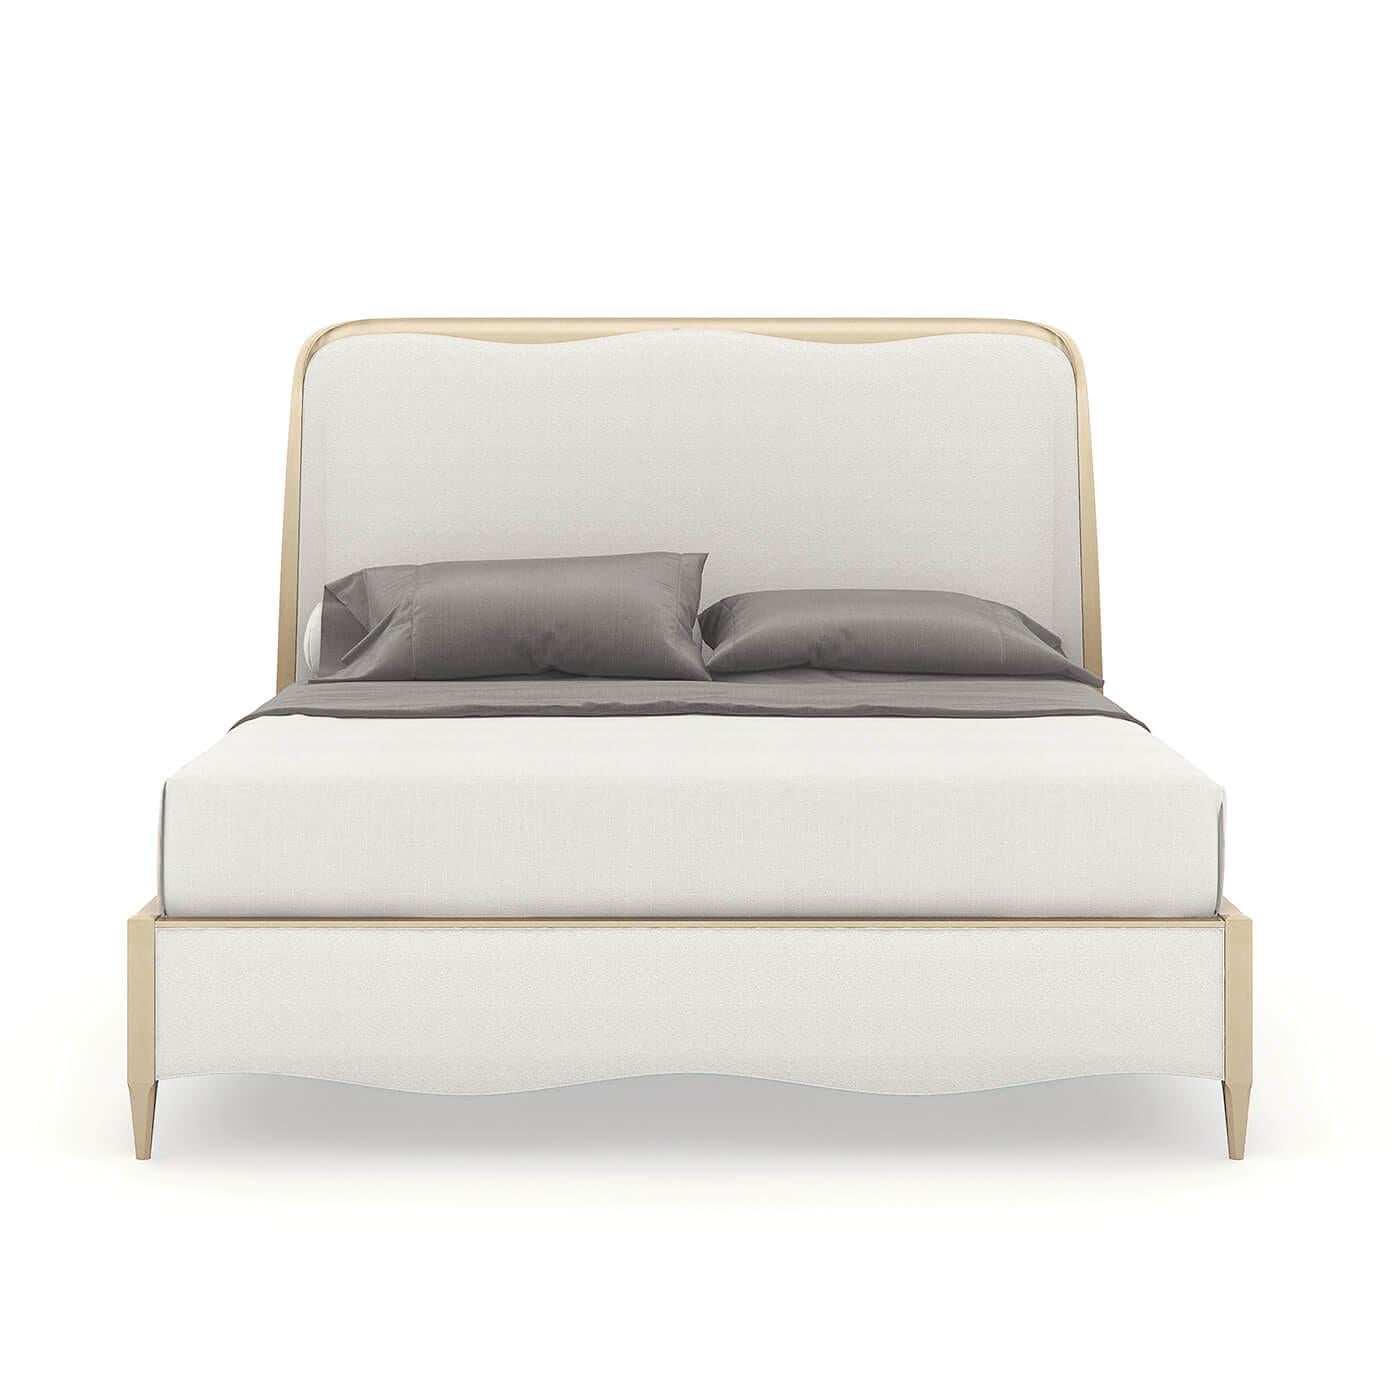 A contemporary pearl finish king bed with a gracefully curved headboard. This beautiful bed has a soft and serene design, its flowing lines are inspired by forms in nature. It has an upholstered headboard, footboard, and rails and sits on tapered